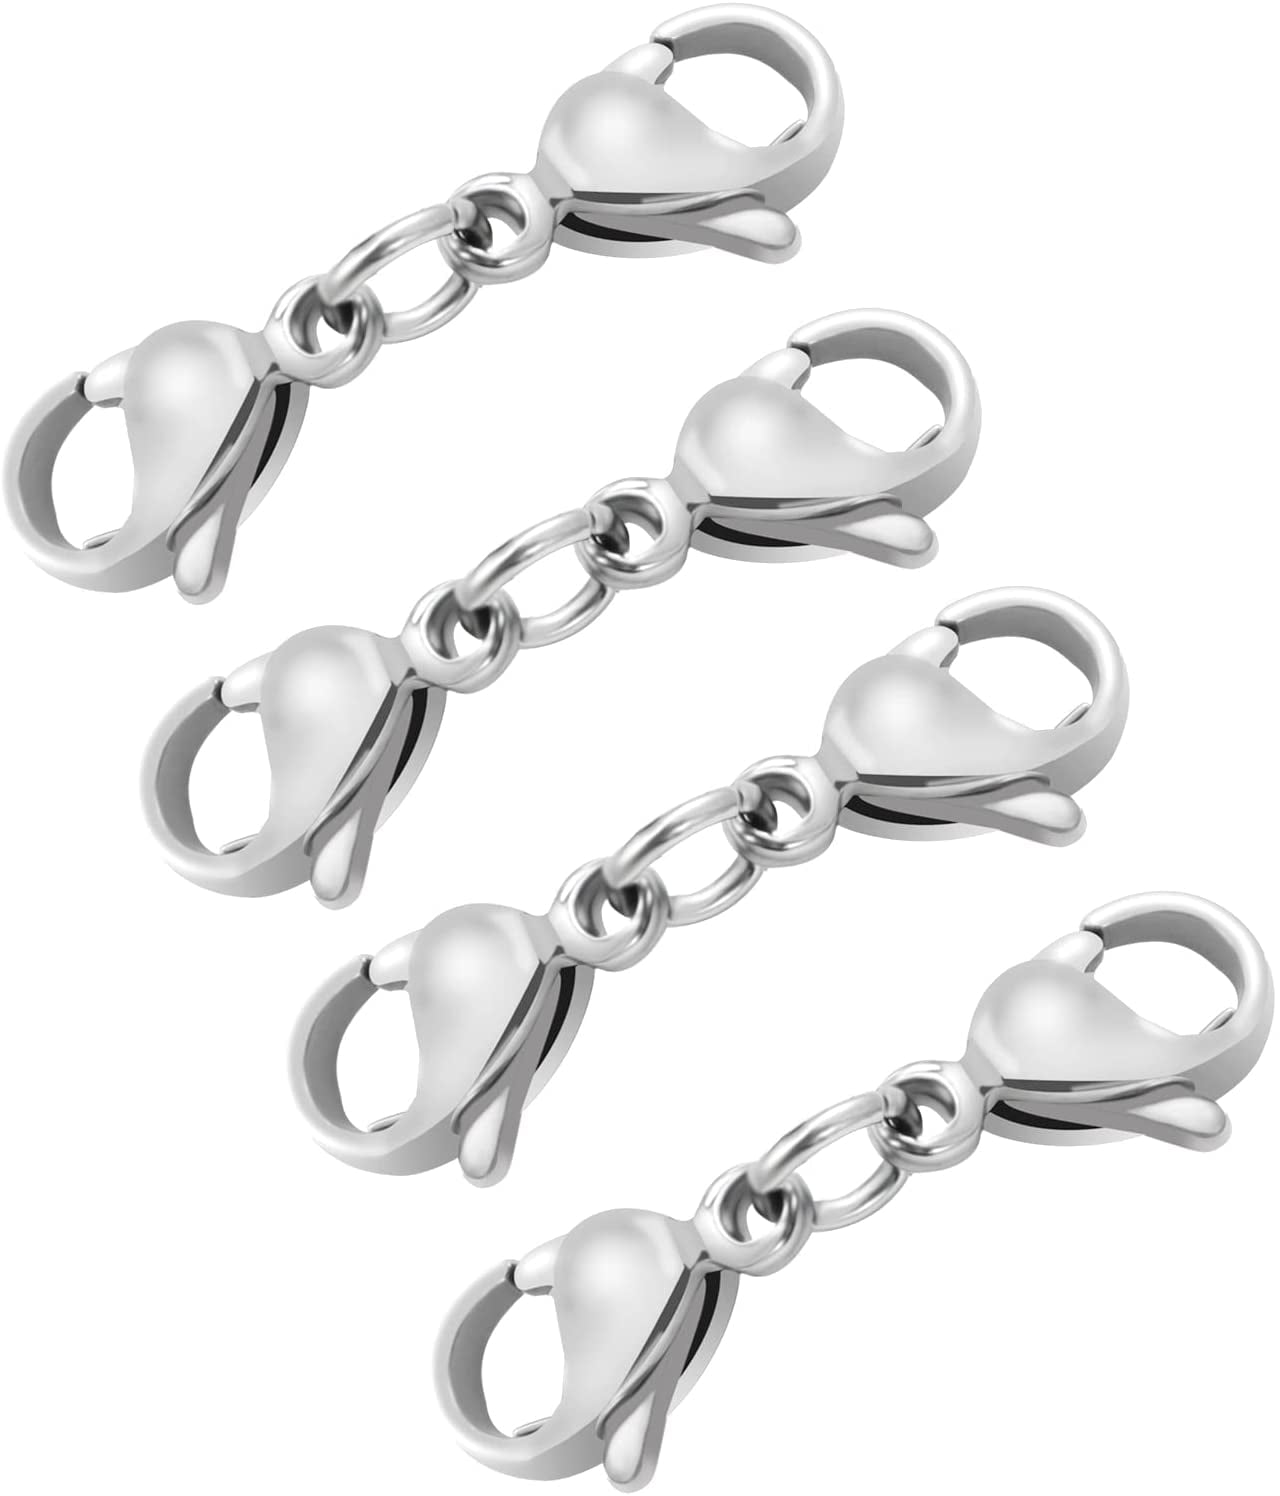 4 PCS Double Lobster Clasp Extender, Double Claw Connector Silver